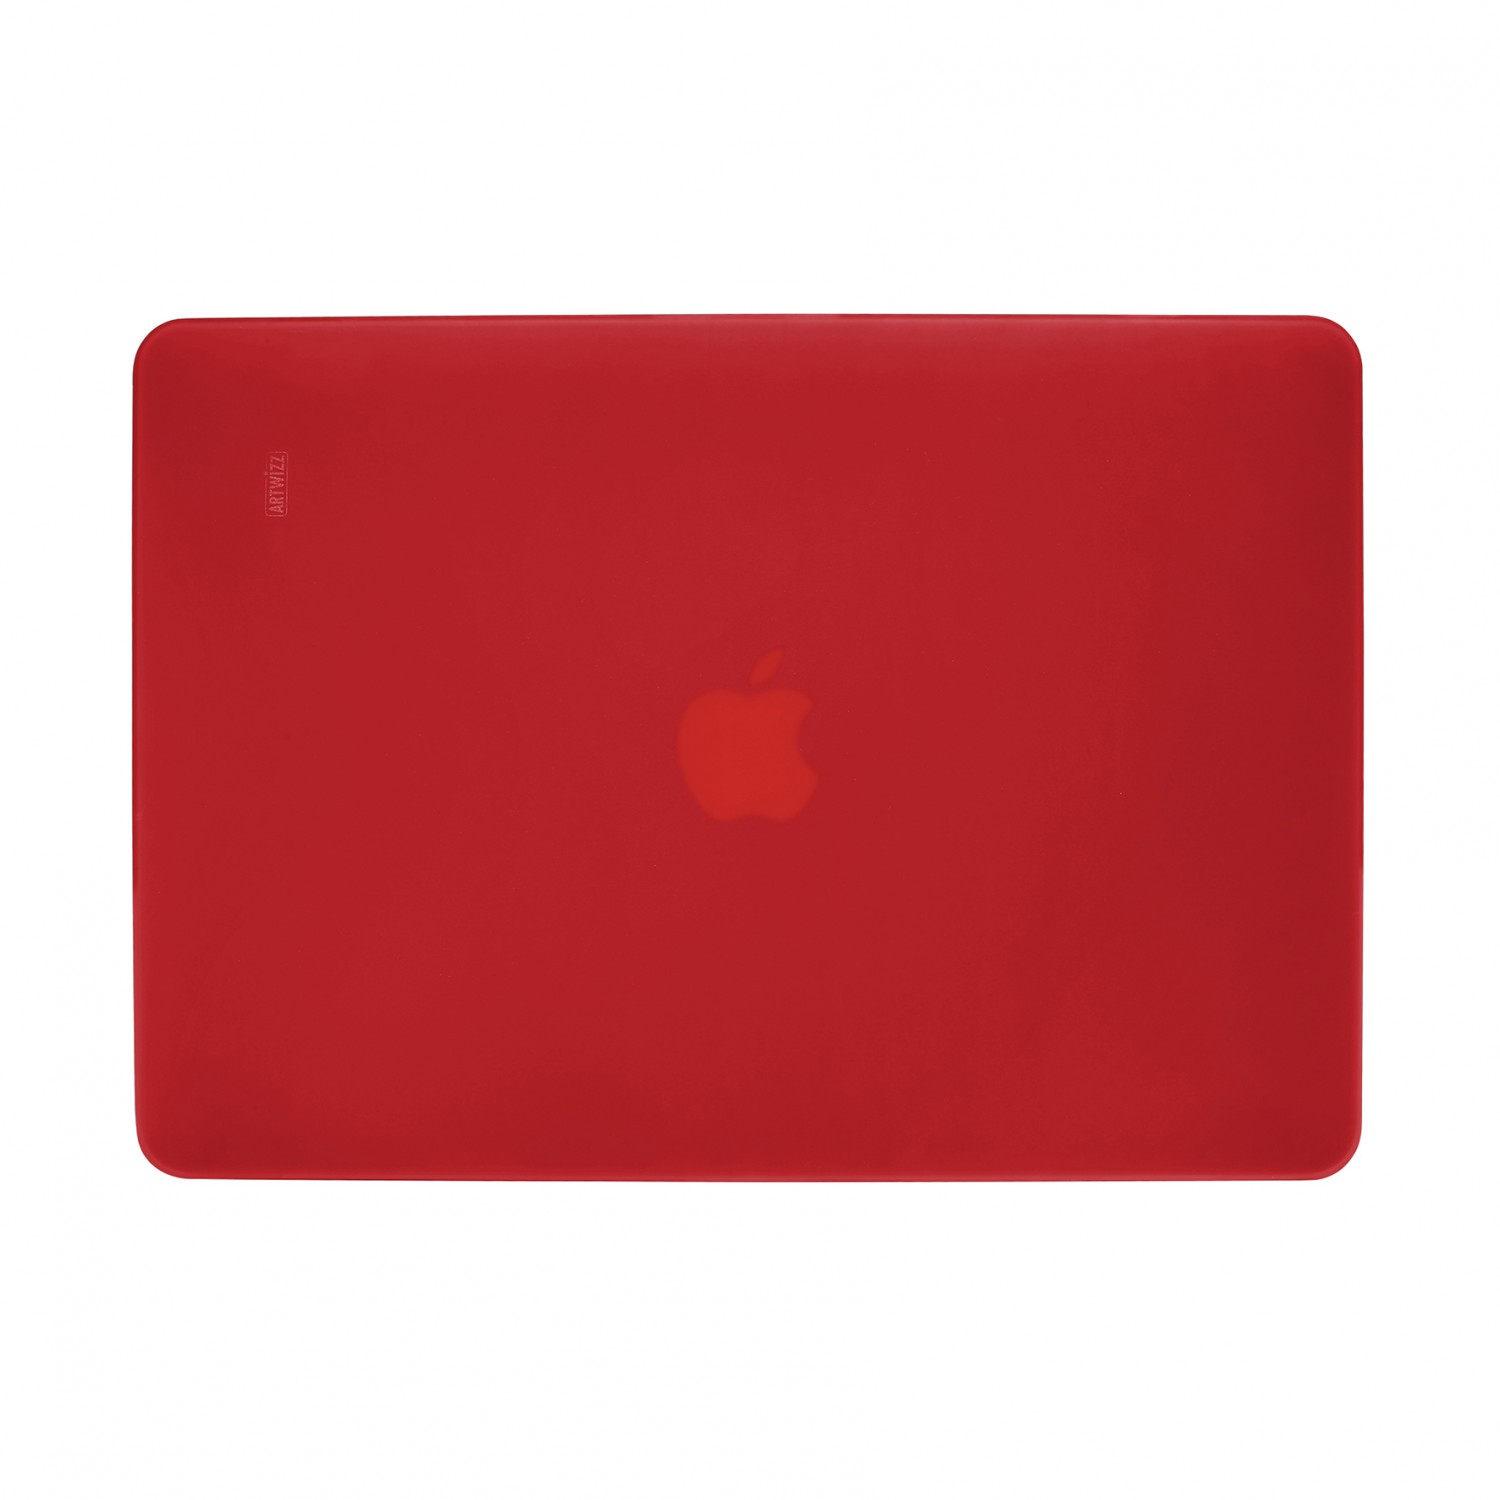 ARTWIZZ Rubber Rot Full Clip Full für Cover MB Kunststoff, MacBook Apple Cover